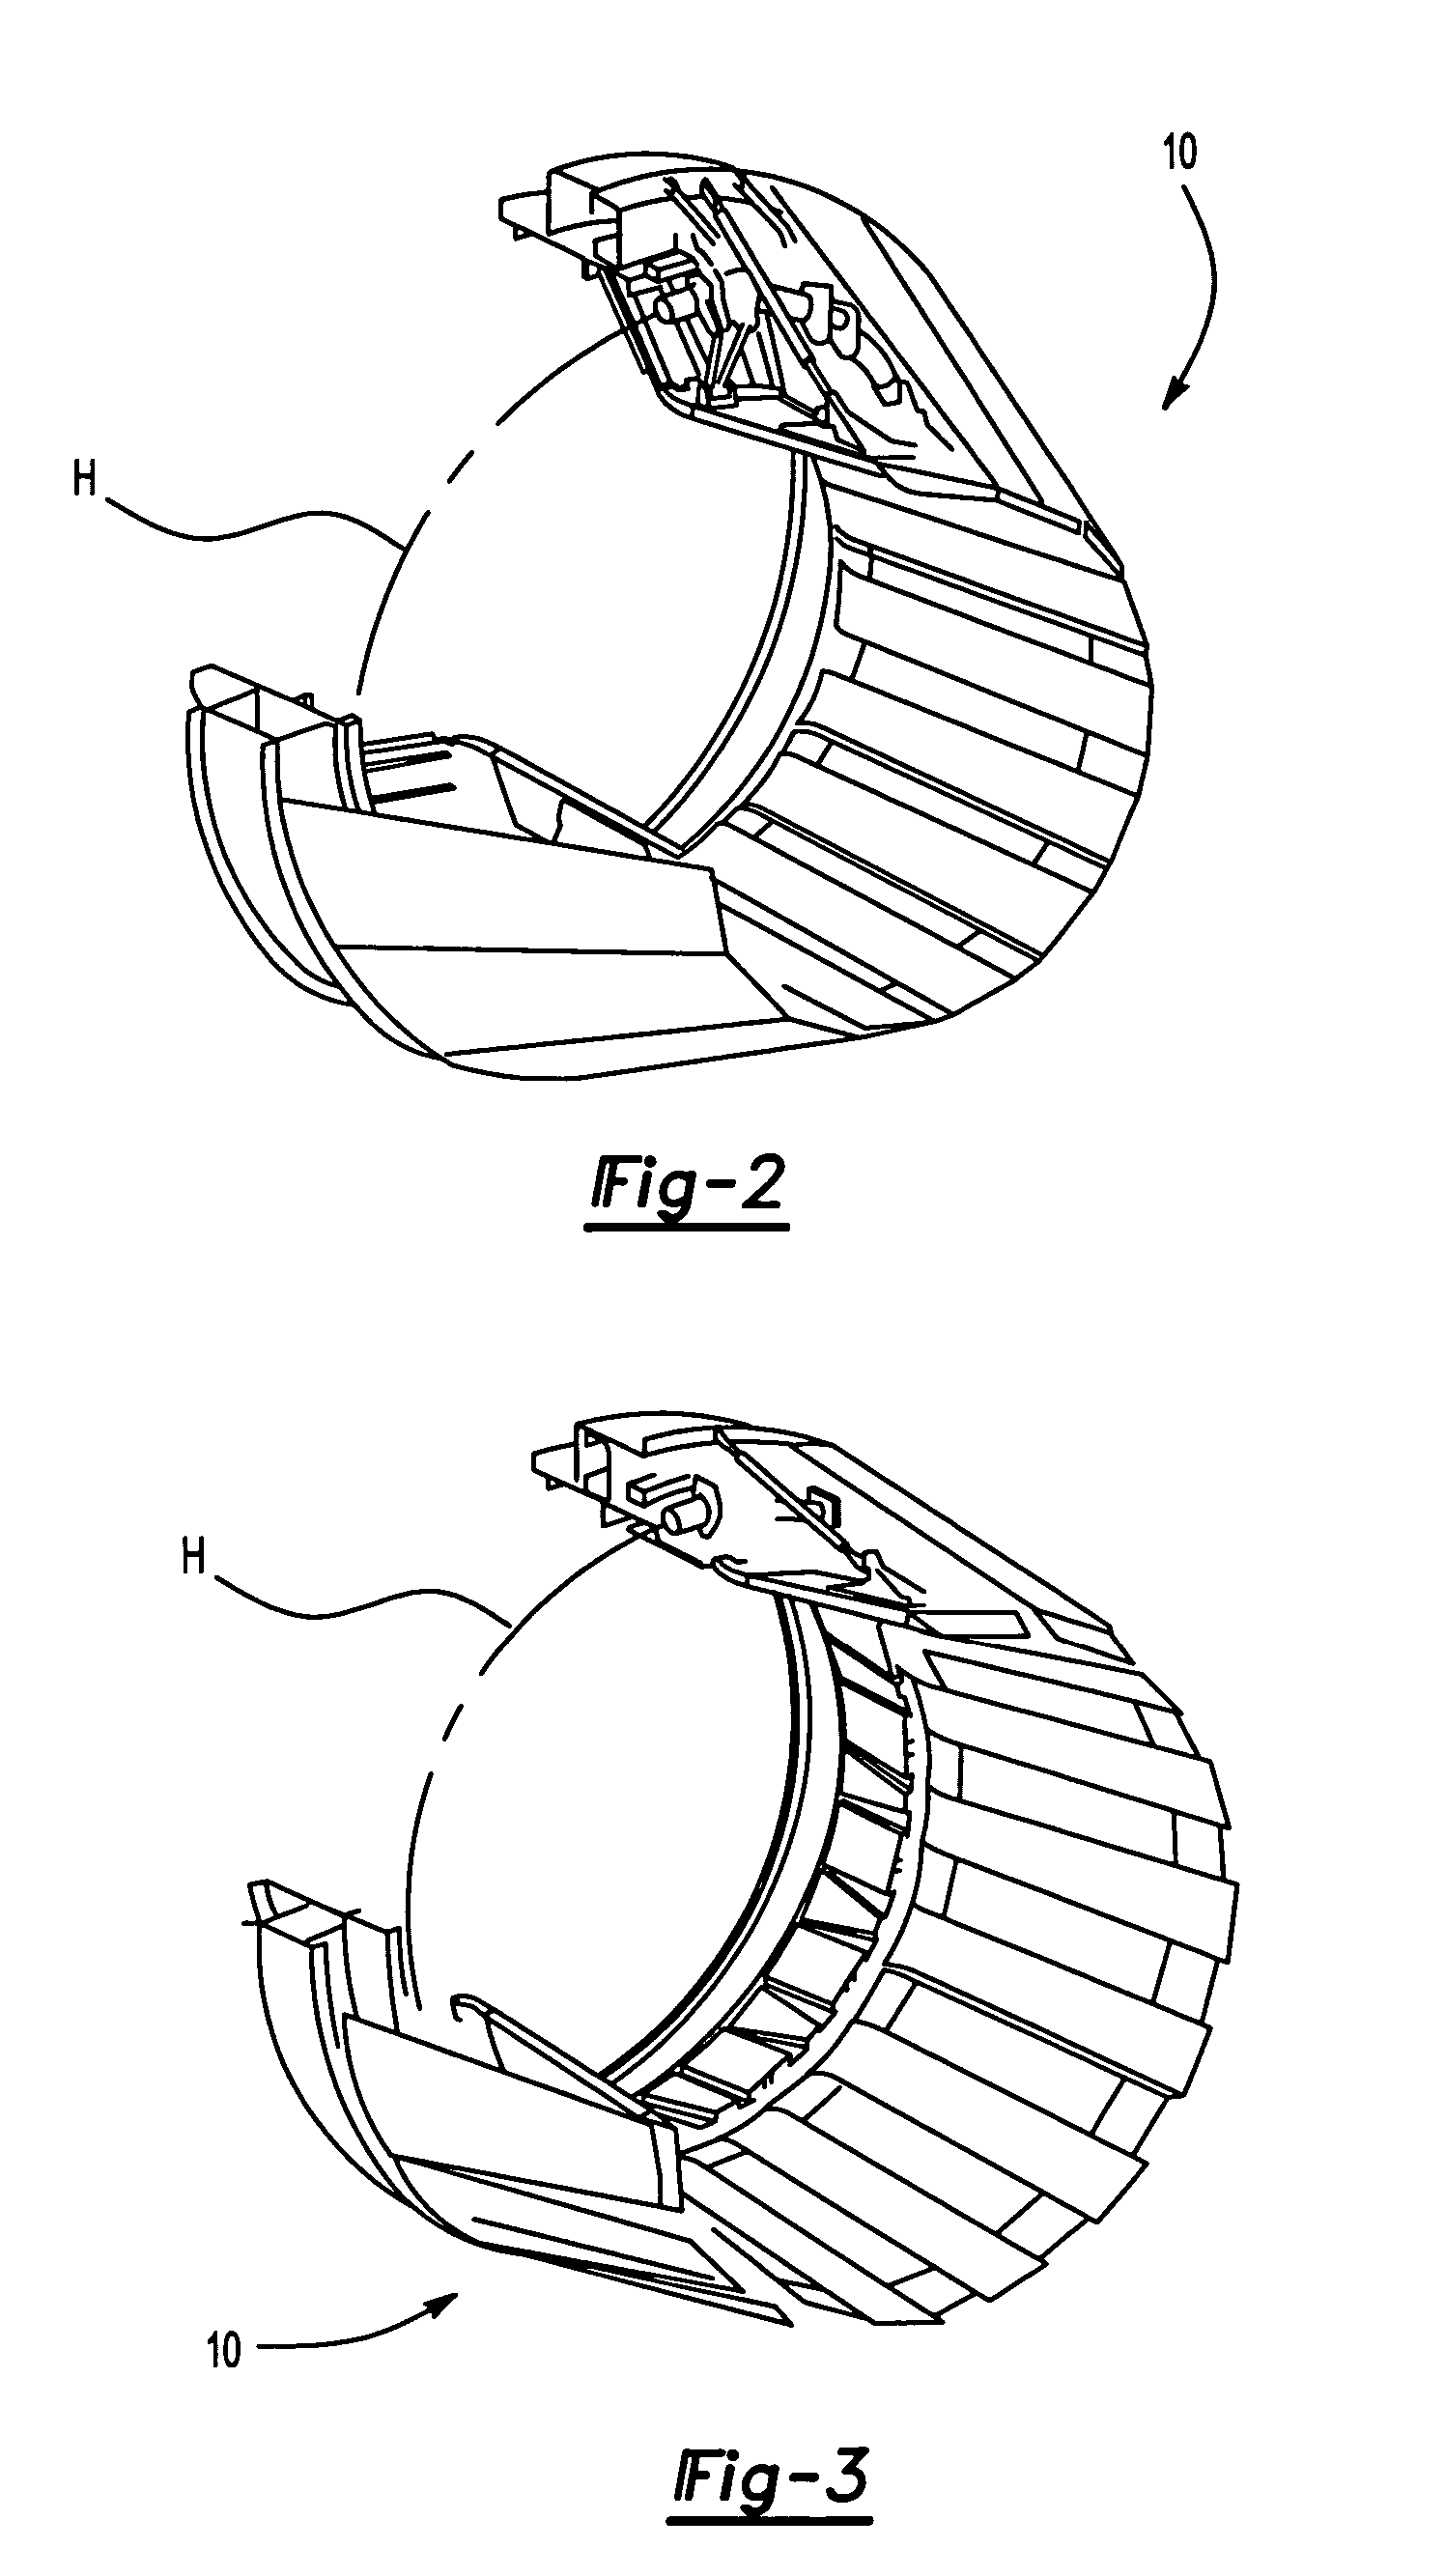 Convergent/divergent nozzle with modulated cooling